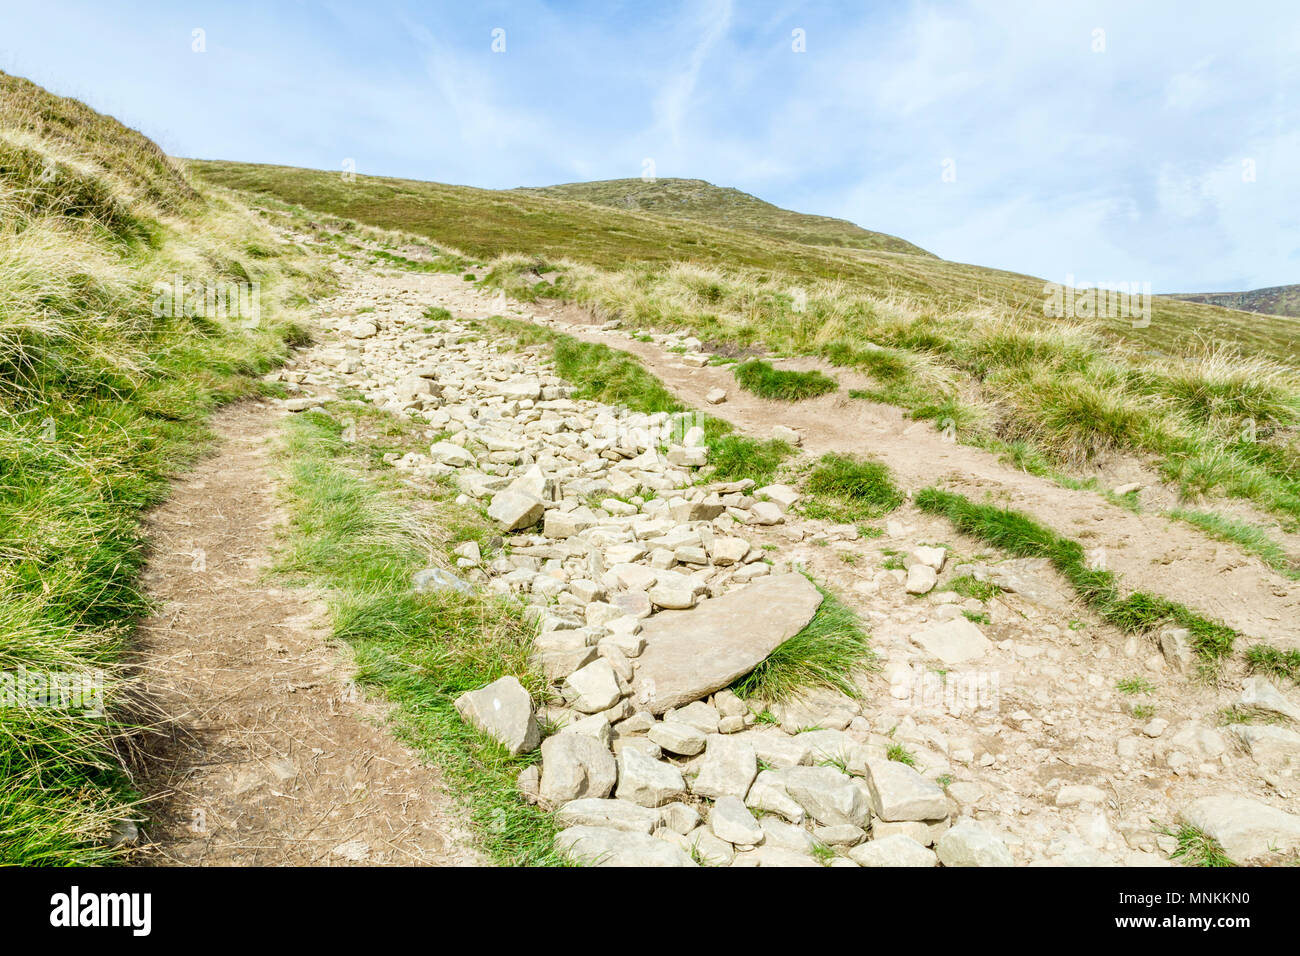 A dry rough stony footpath going up hill towards Grindslow Knoll, Kinder Scout during Summer. Derbyshire, Peak District, England, UK Stock Photo